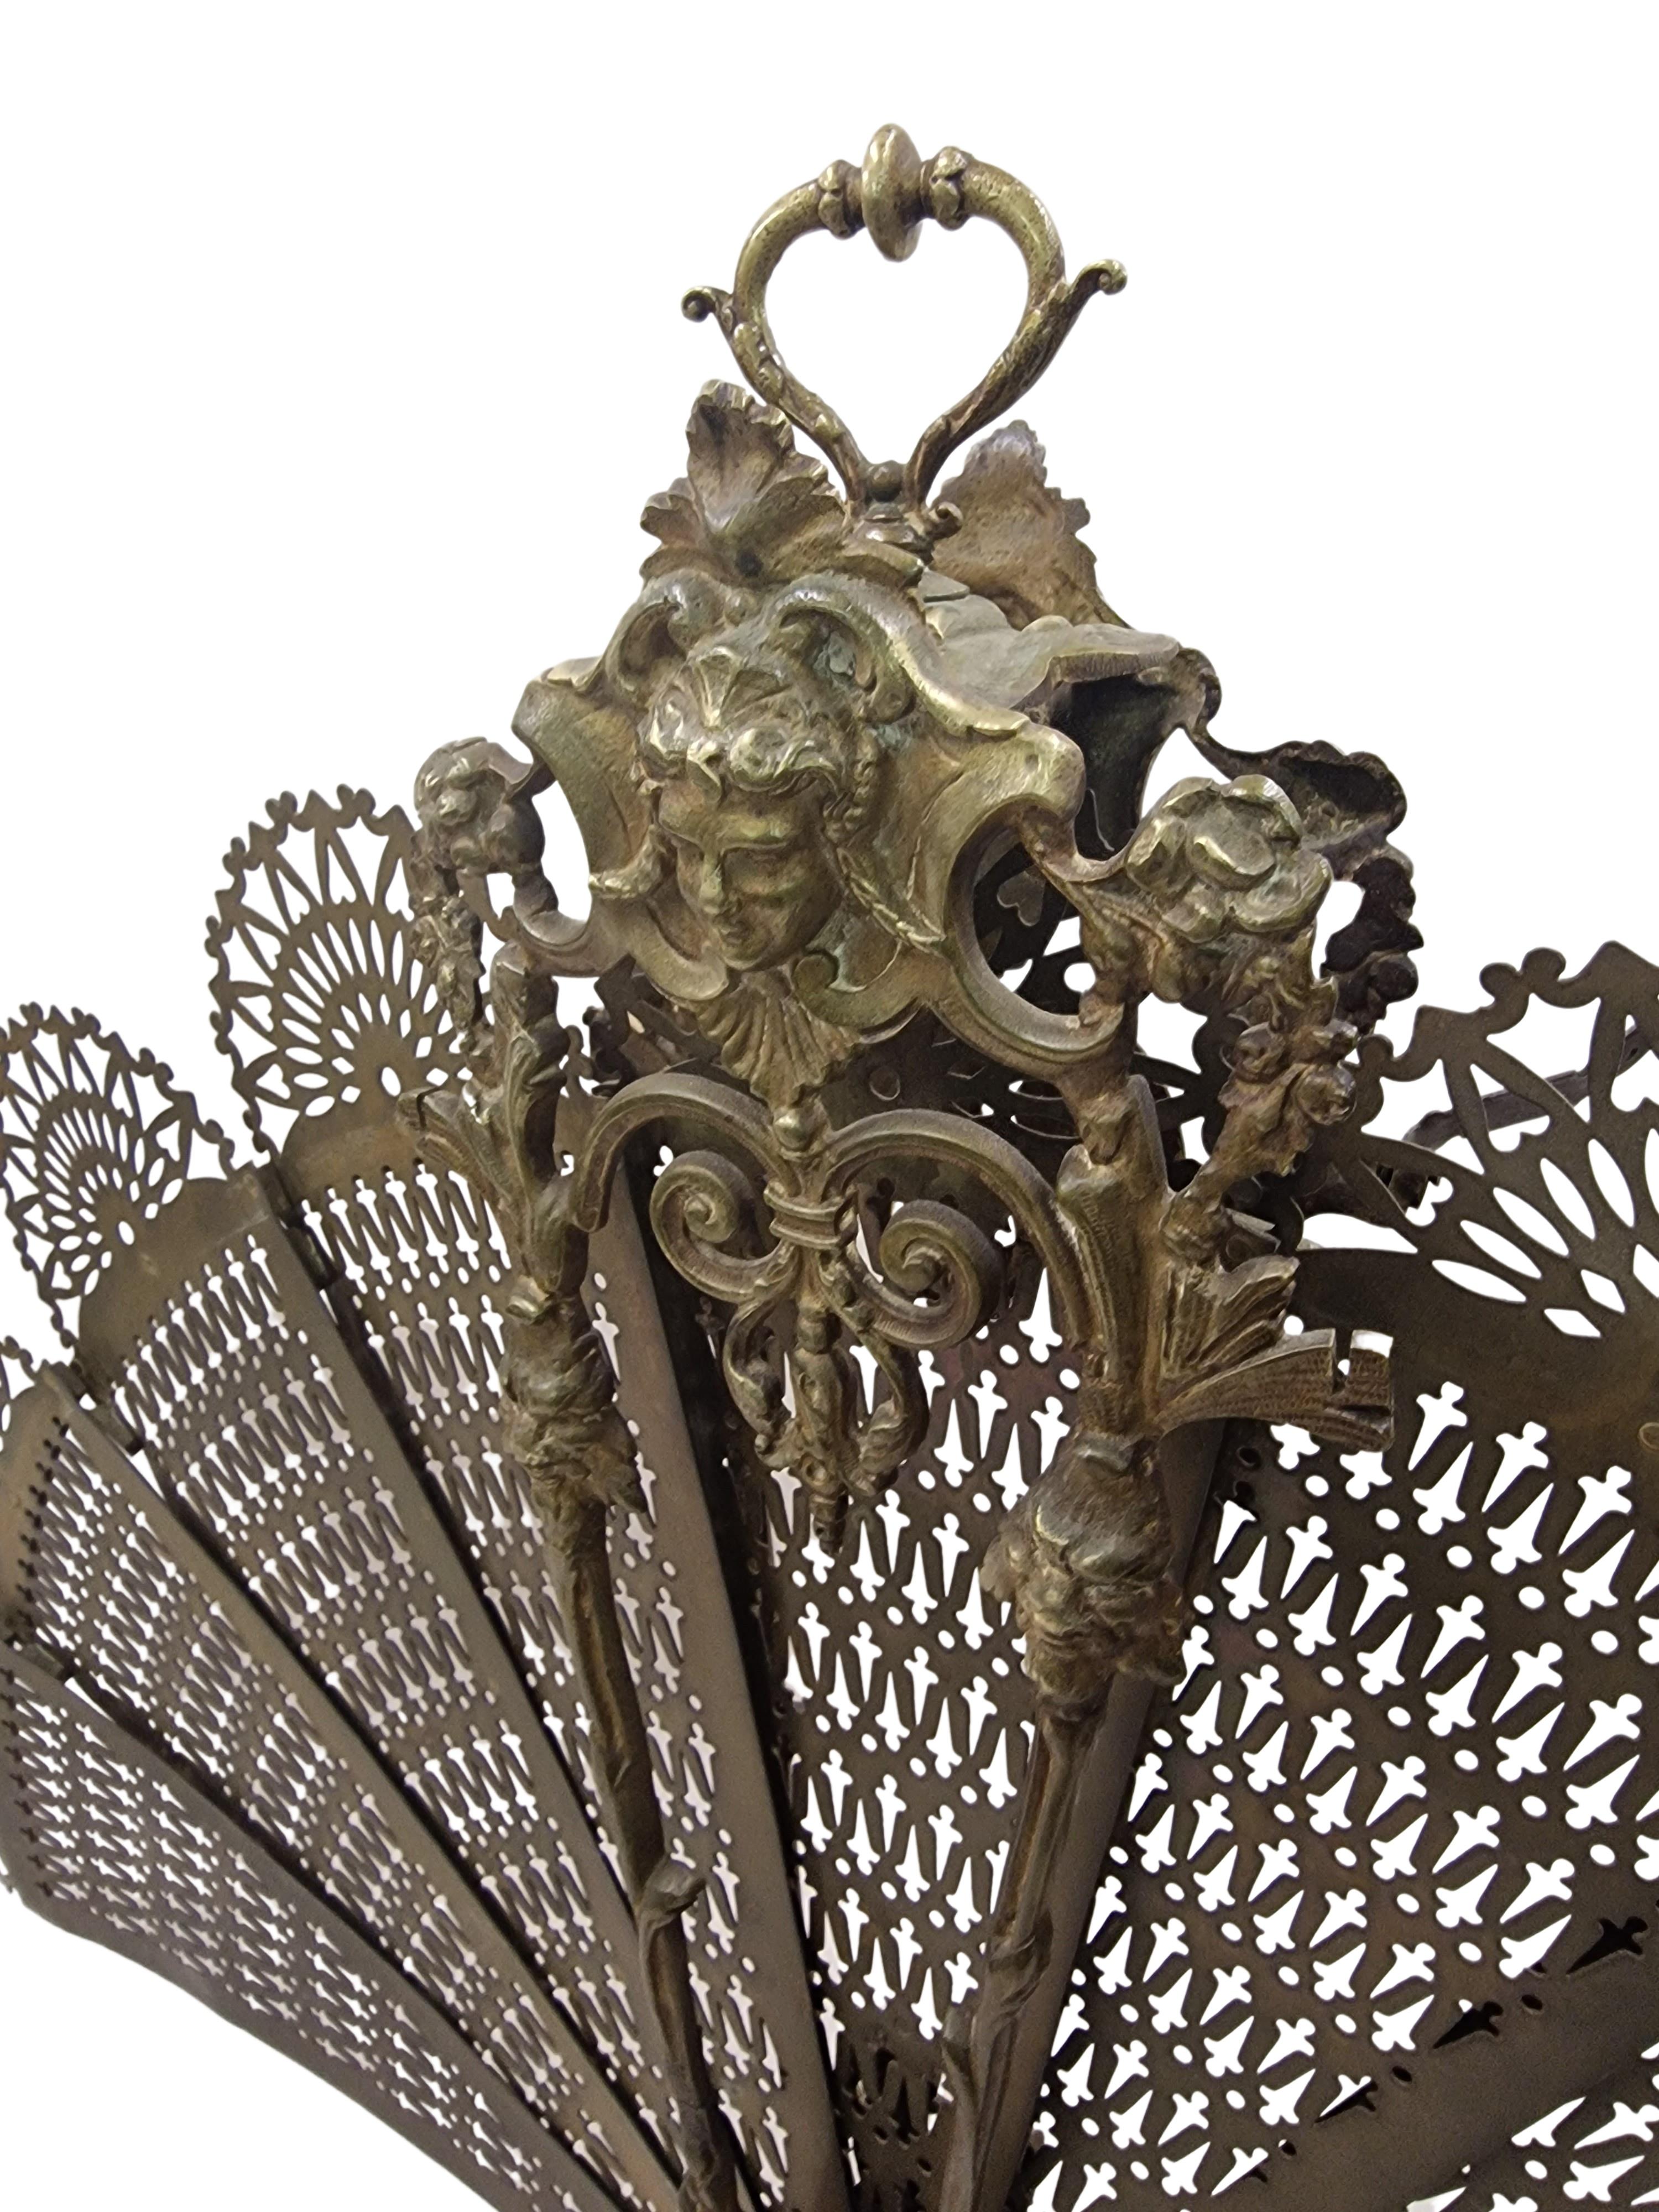 Big Fireplace Screen, Spark Protection, Decoration, solid brass, ~1890, France 3